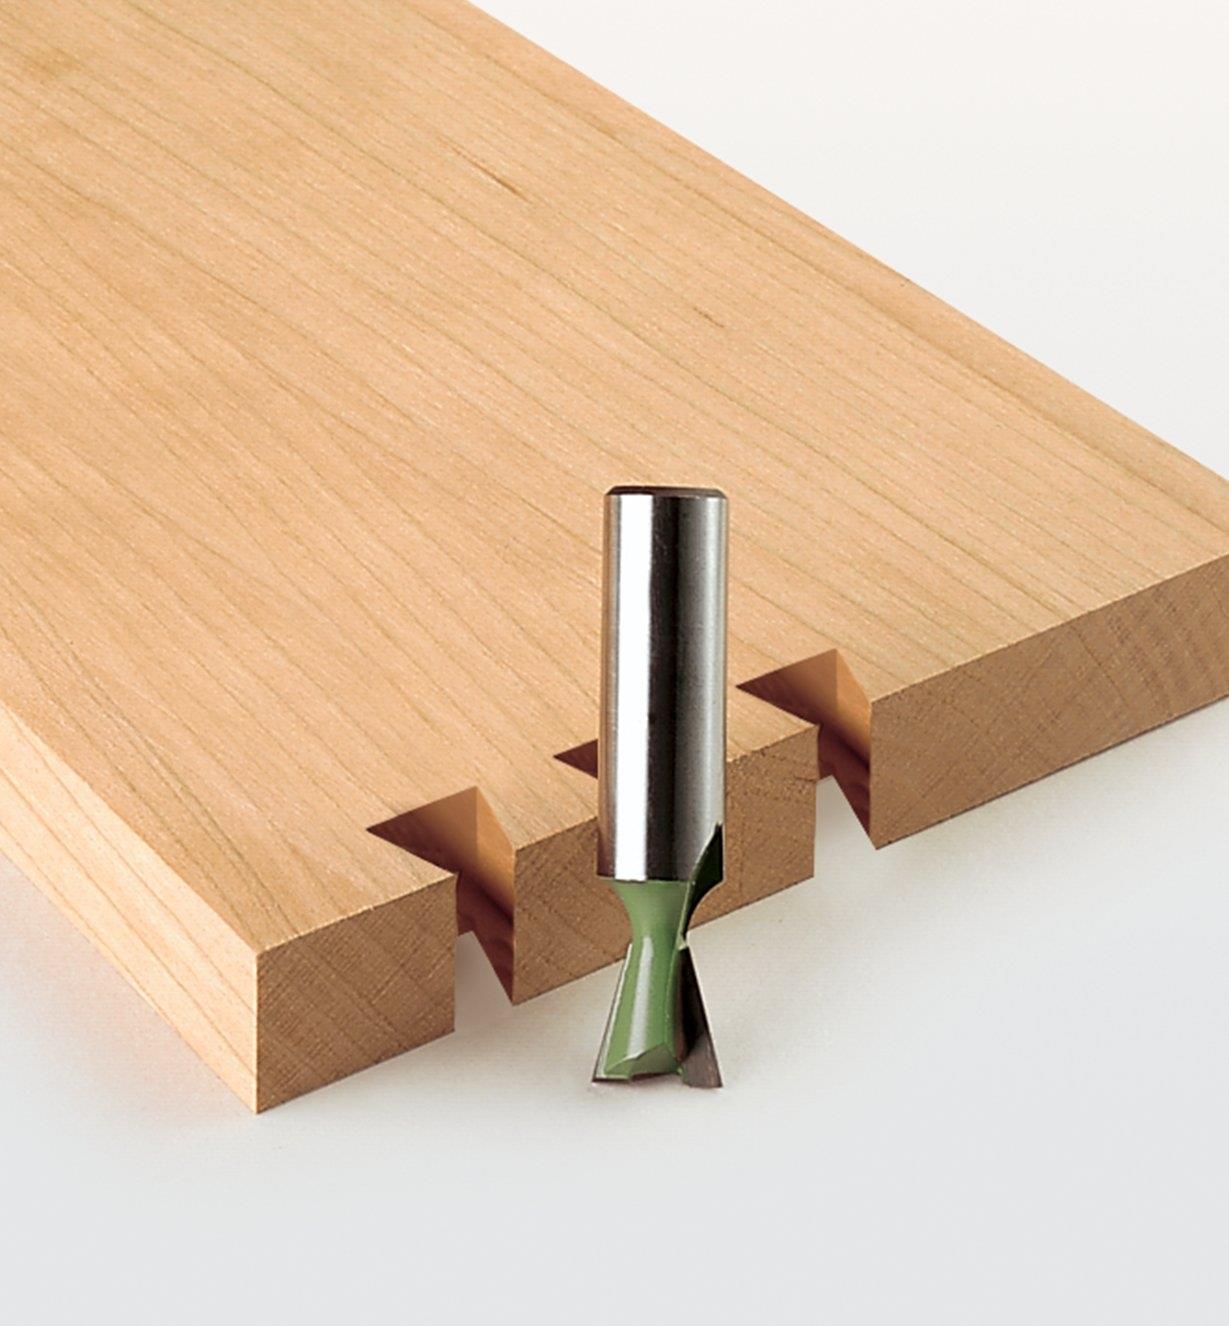 Dovetail bit next to a board with dovetail joints cut into it